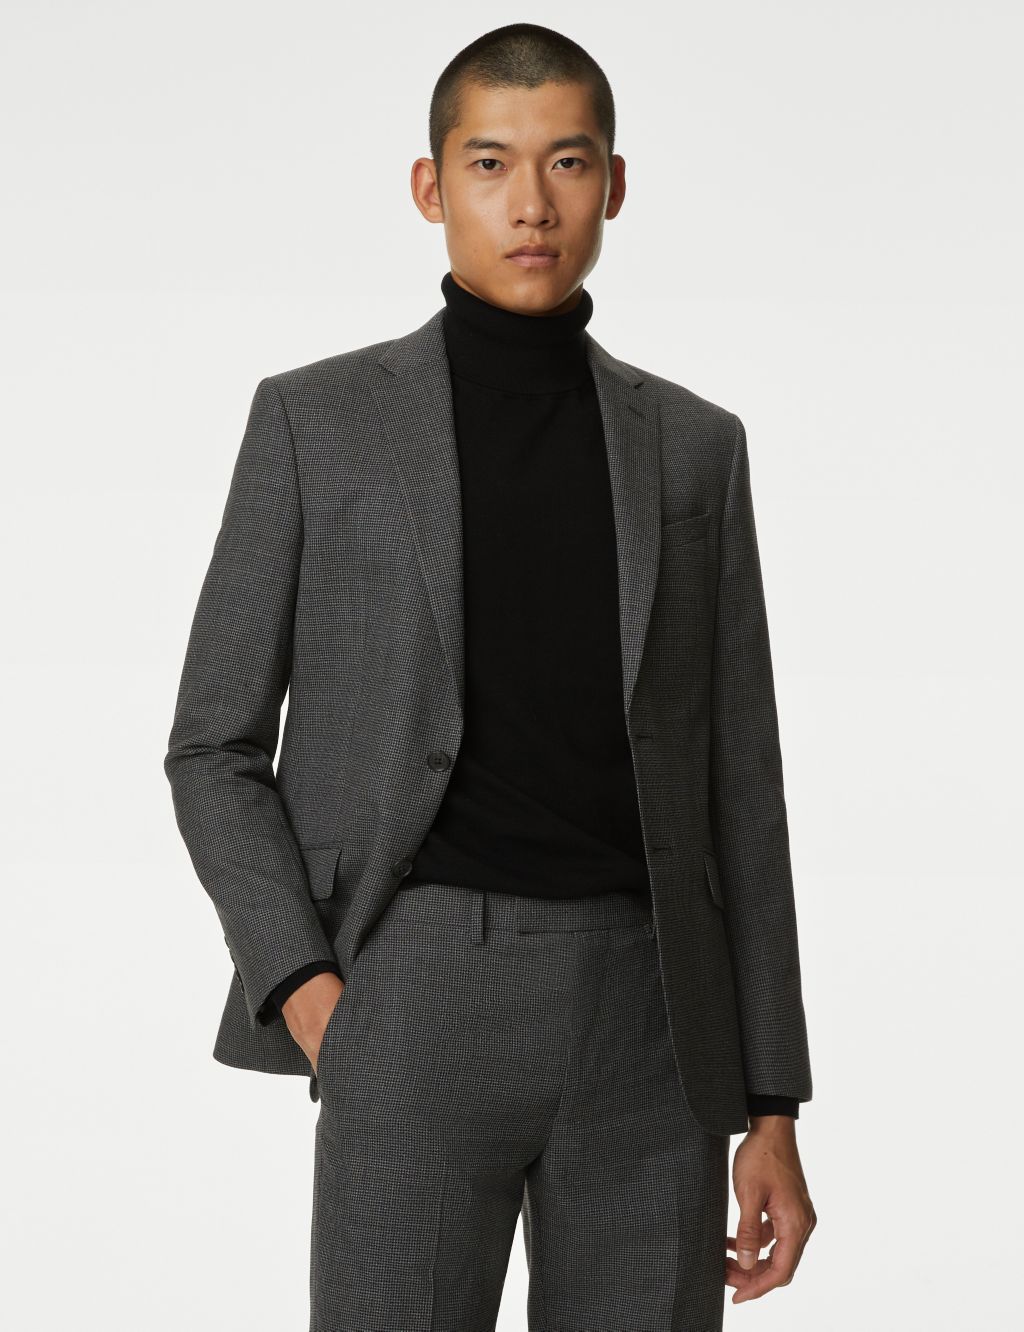 Tailored Fit Wool Blend Suit image 2